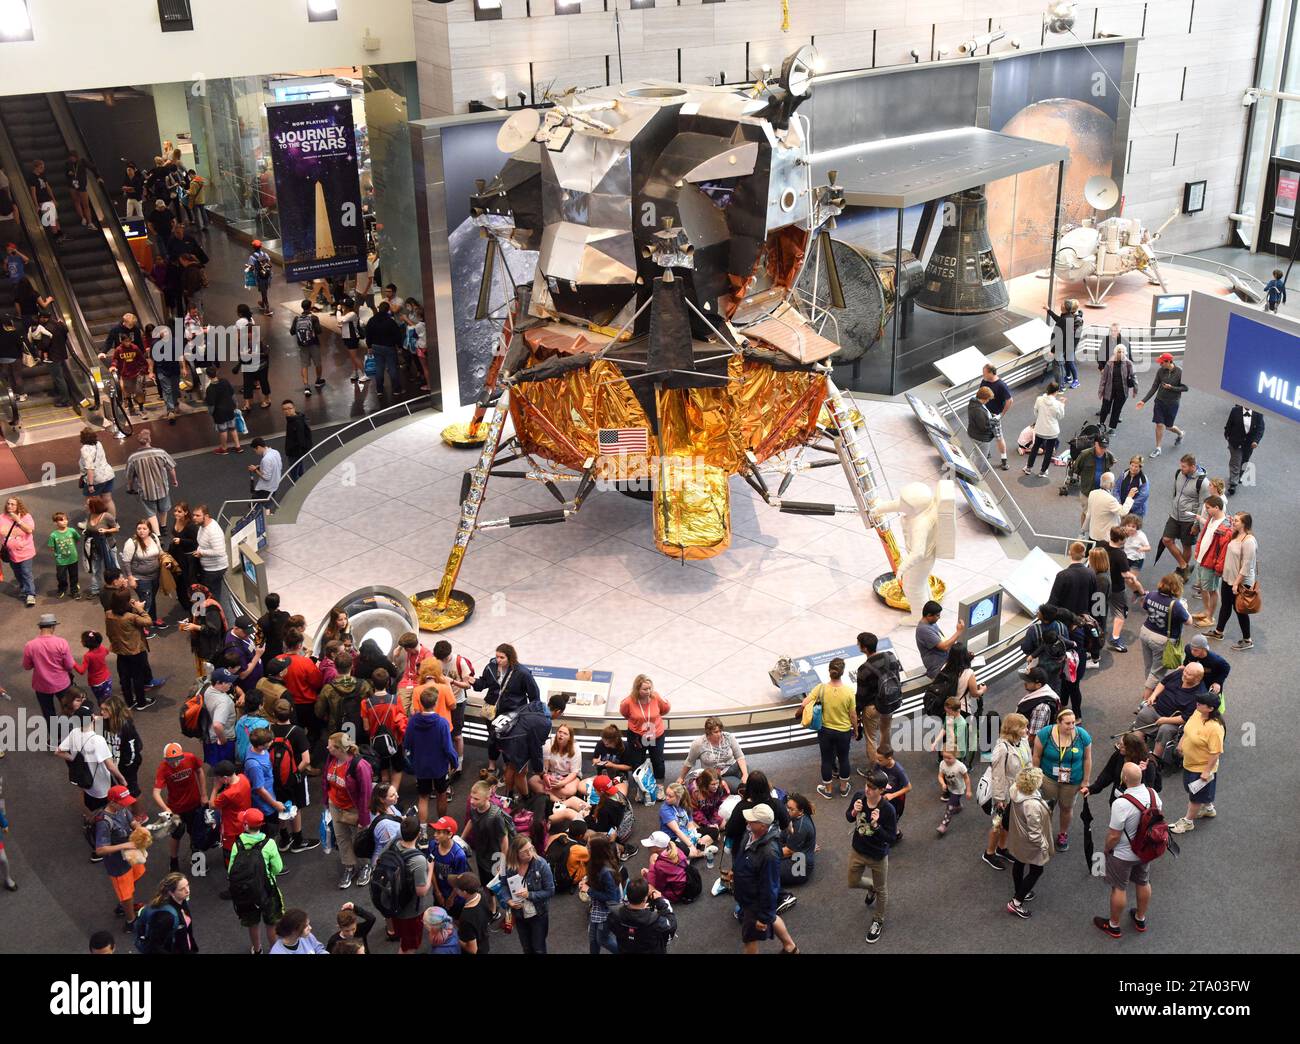 Washington, DC - June 03, 2018: Crowd of people  in the Smithsonian National Air and Space Museum. Stock Photo